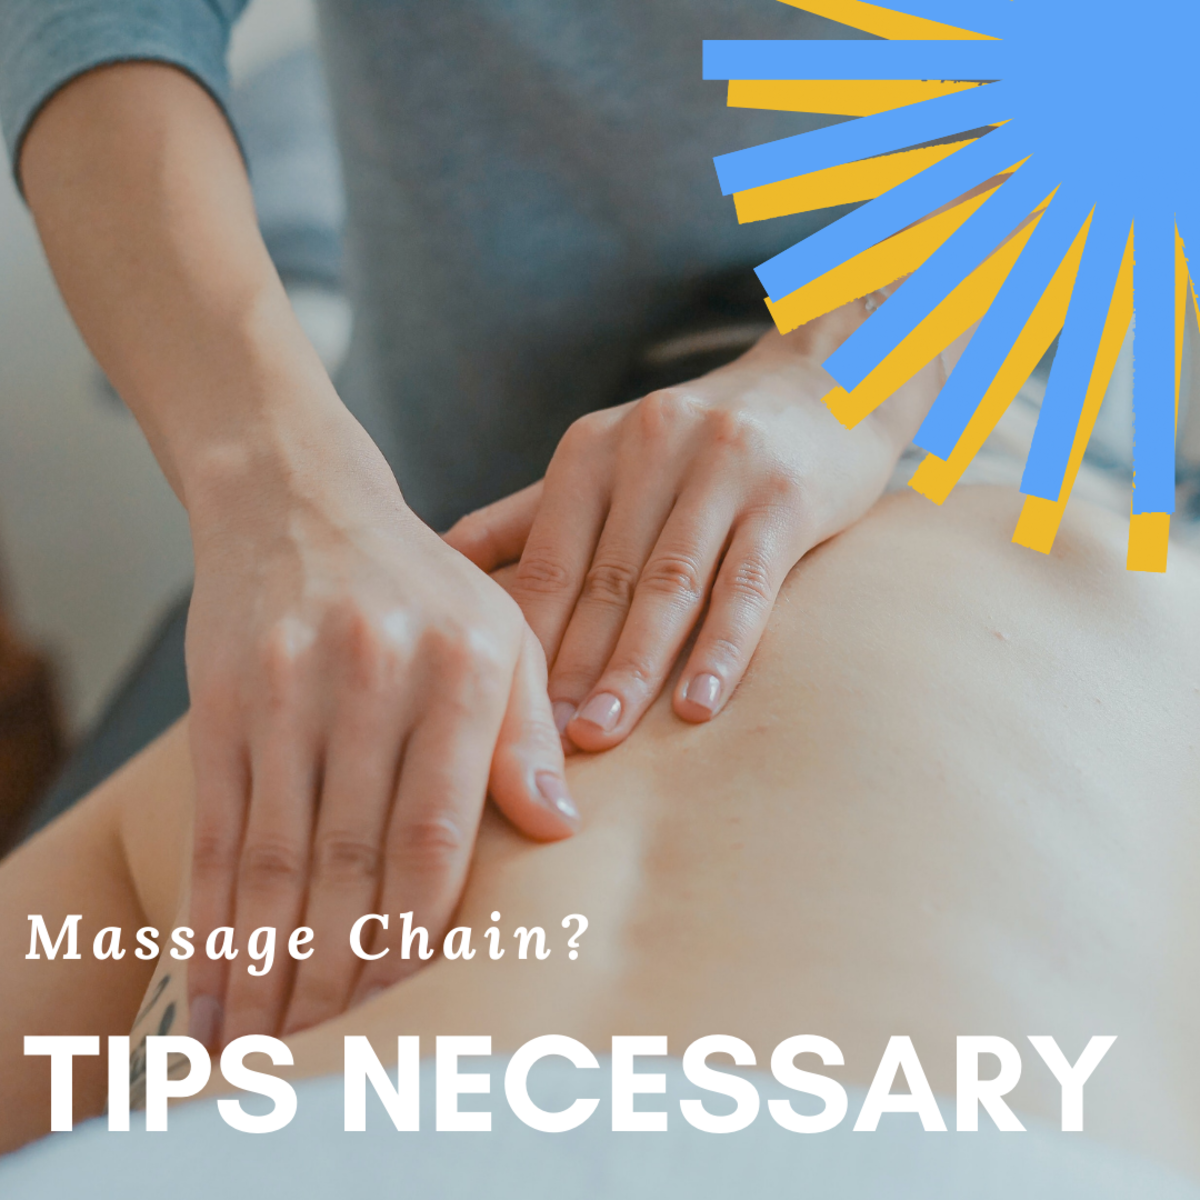 Massage chain workers often rely on tips.